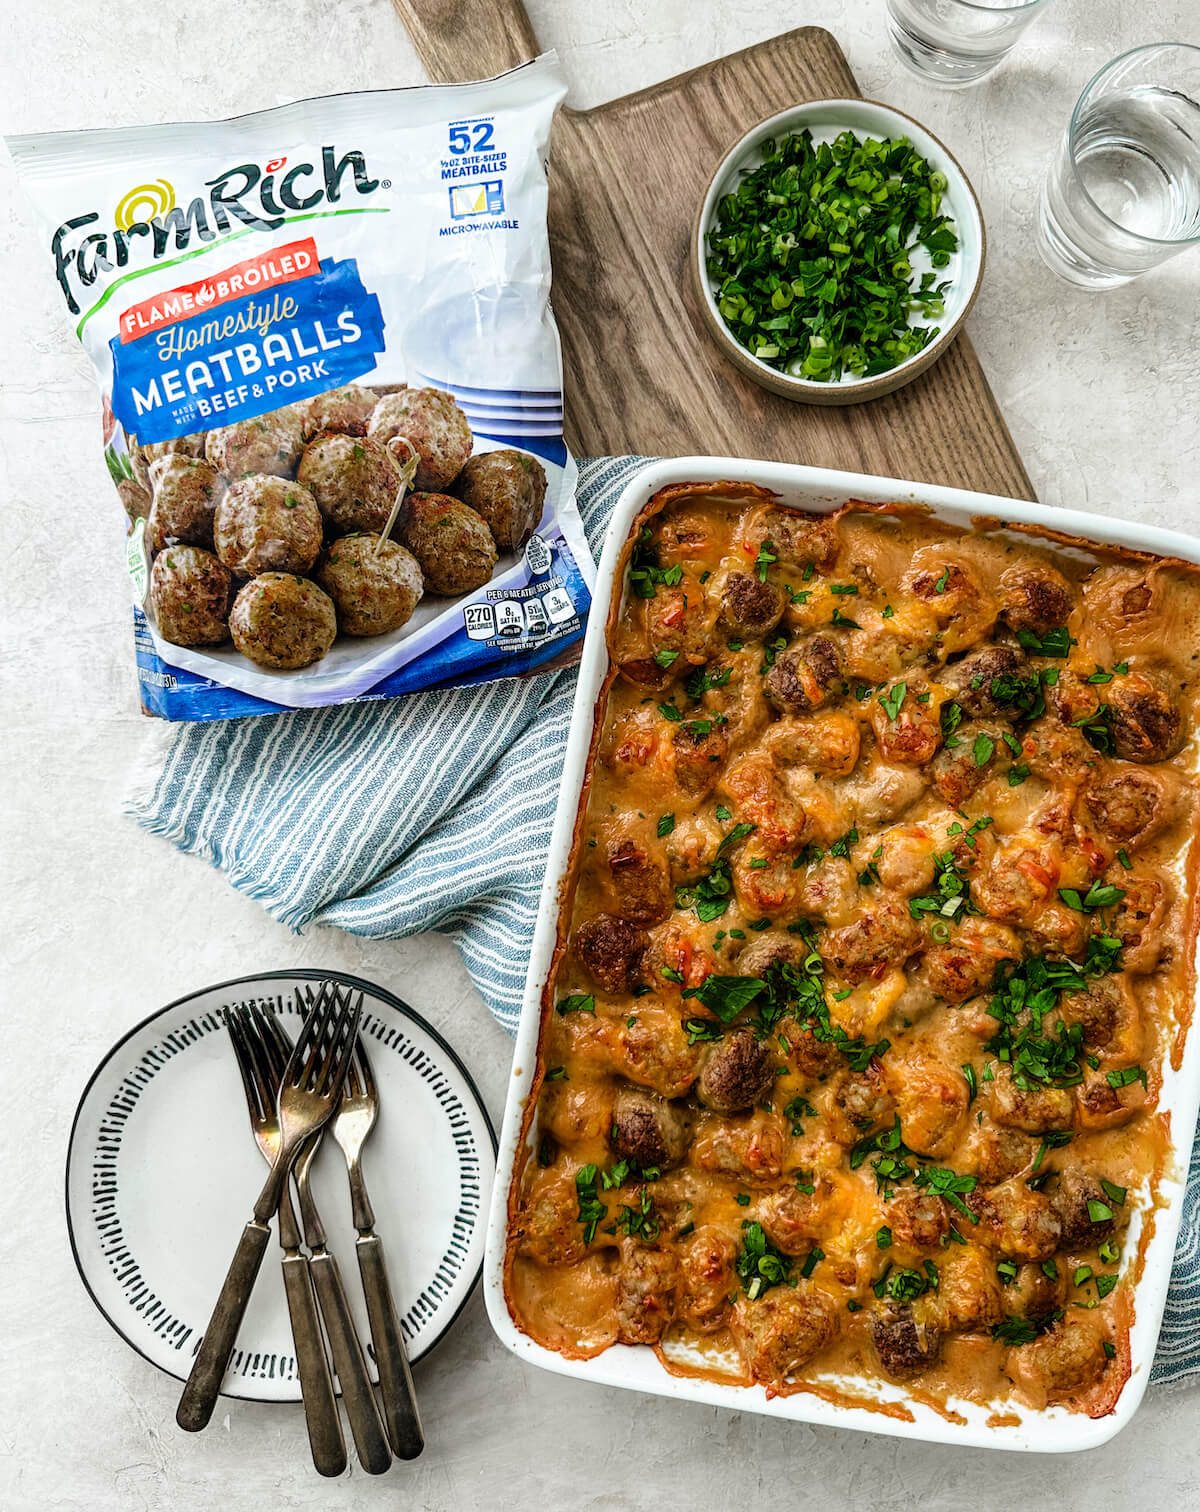 Baking dish of meatball casserole with FarmRich meatballs in package on the side showing product.